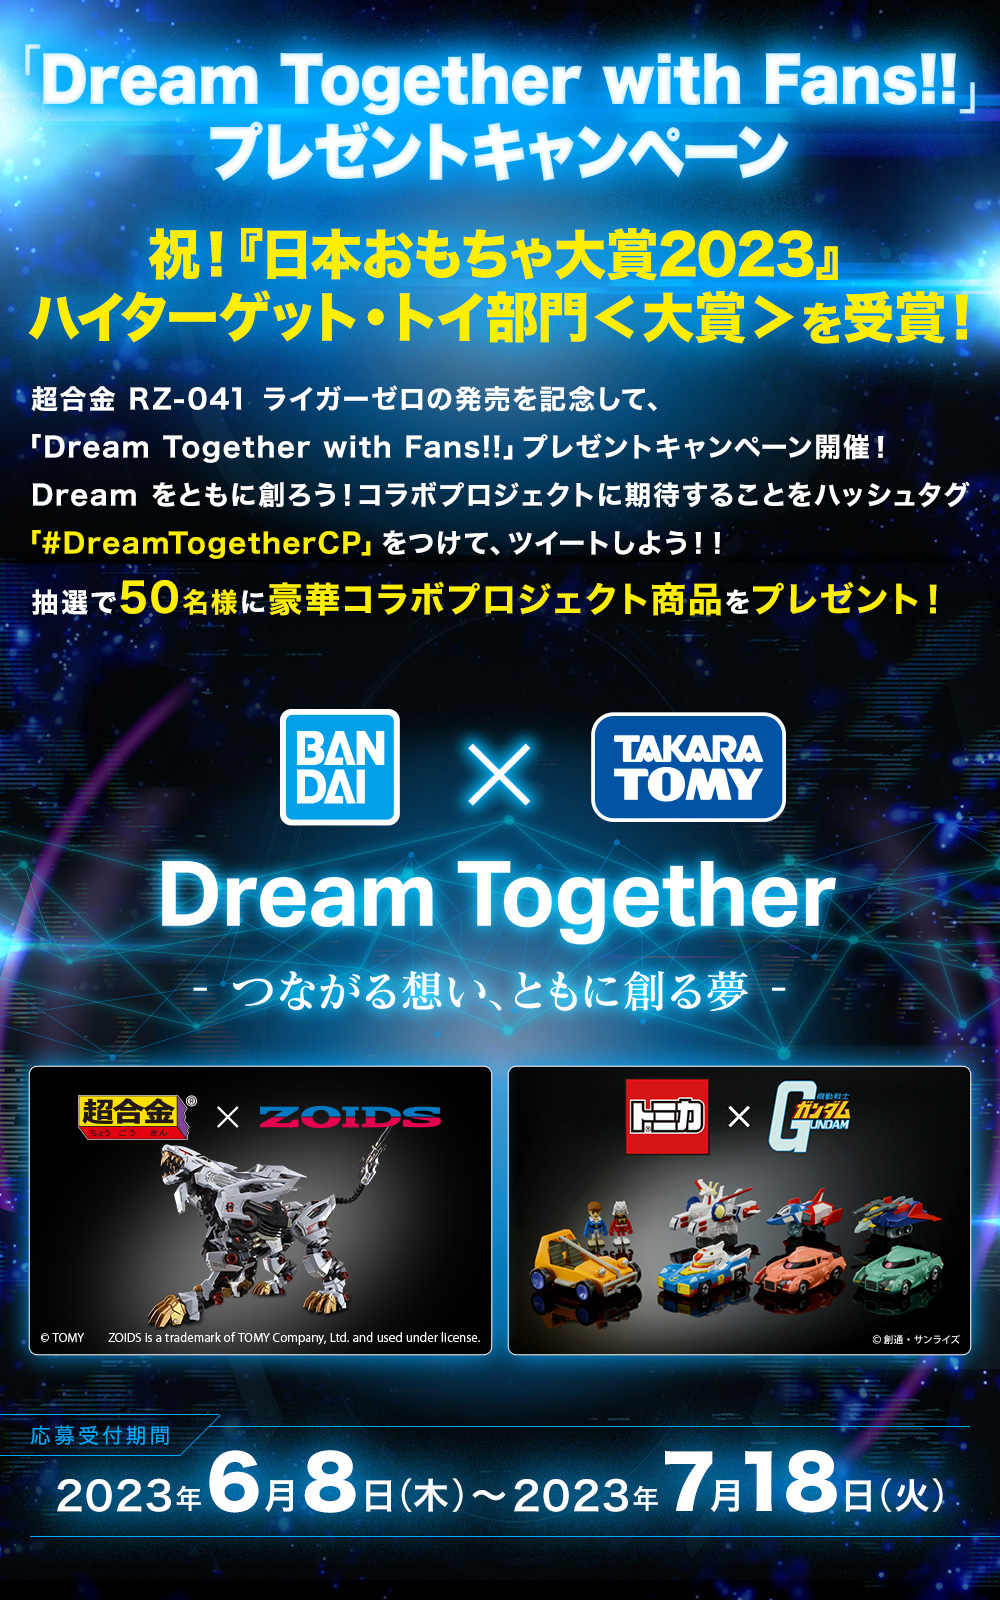 "Dream Together with Fans!!" Gift campaign image